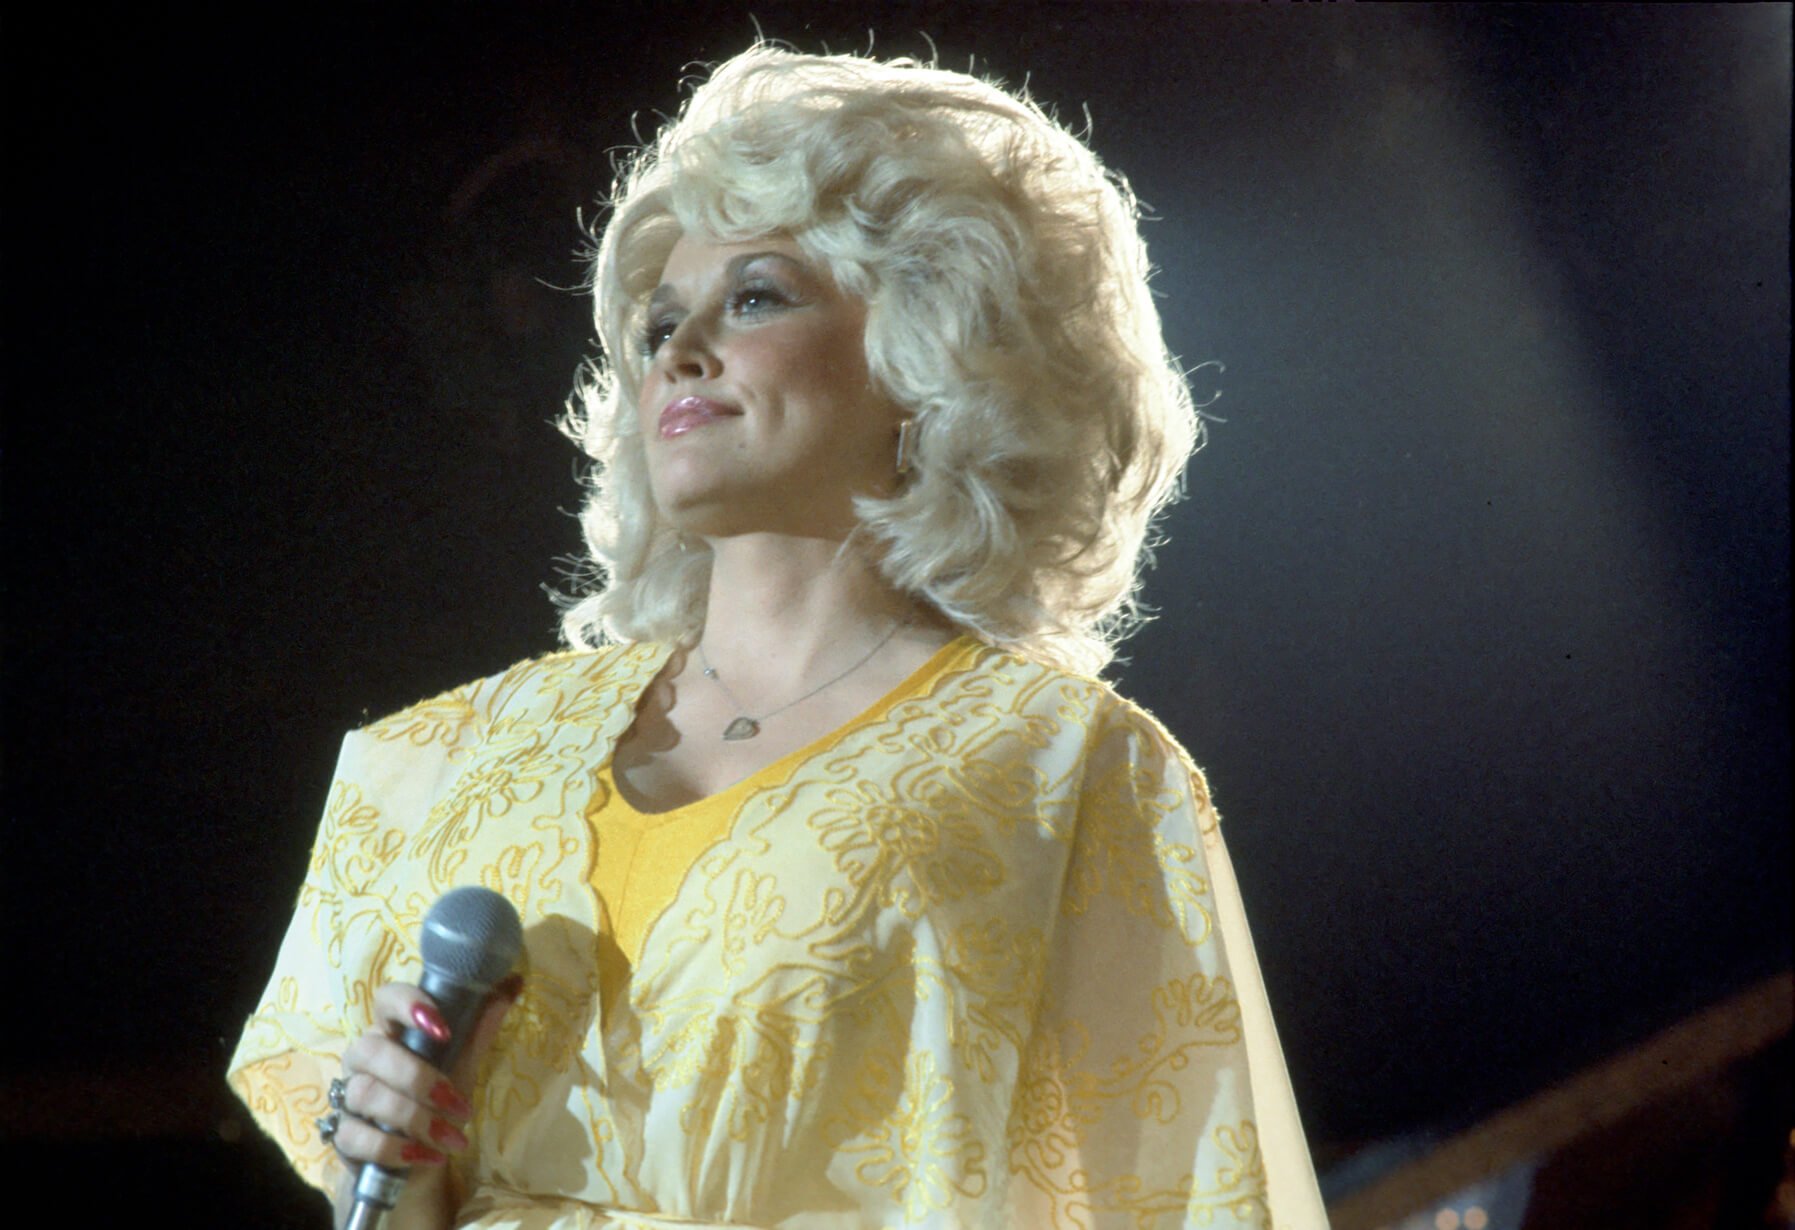 Dolly Parton performing in 1975 showing off her style with a yellow dress